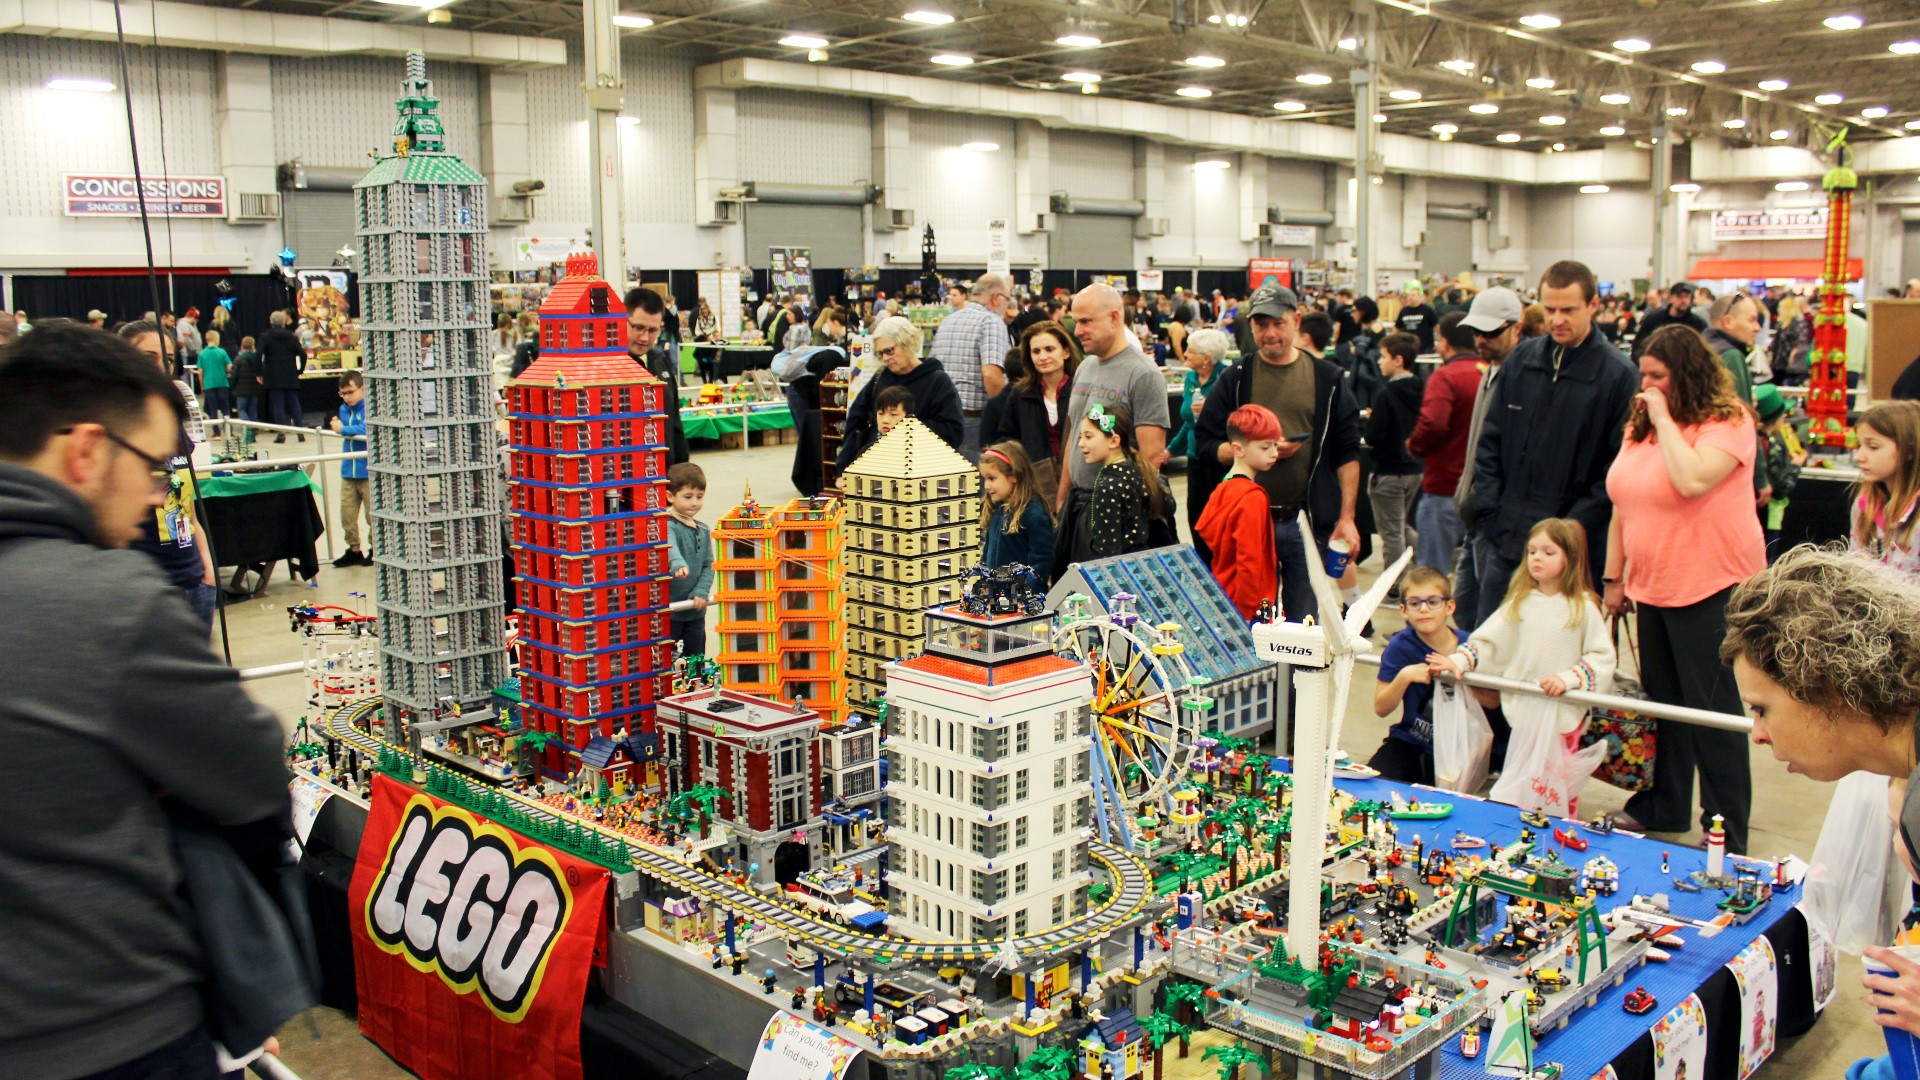 LEGO fans will have the chance to shop and build their own creations Oct. 2-3.